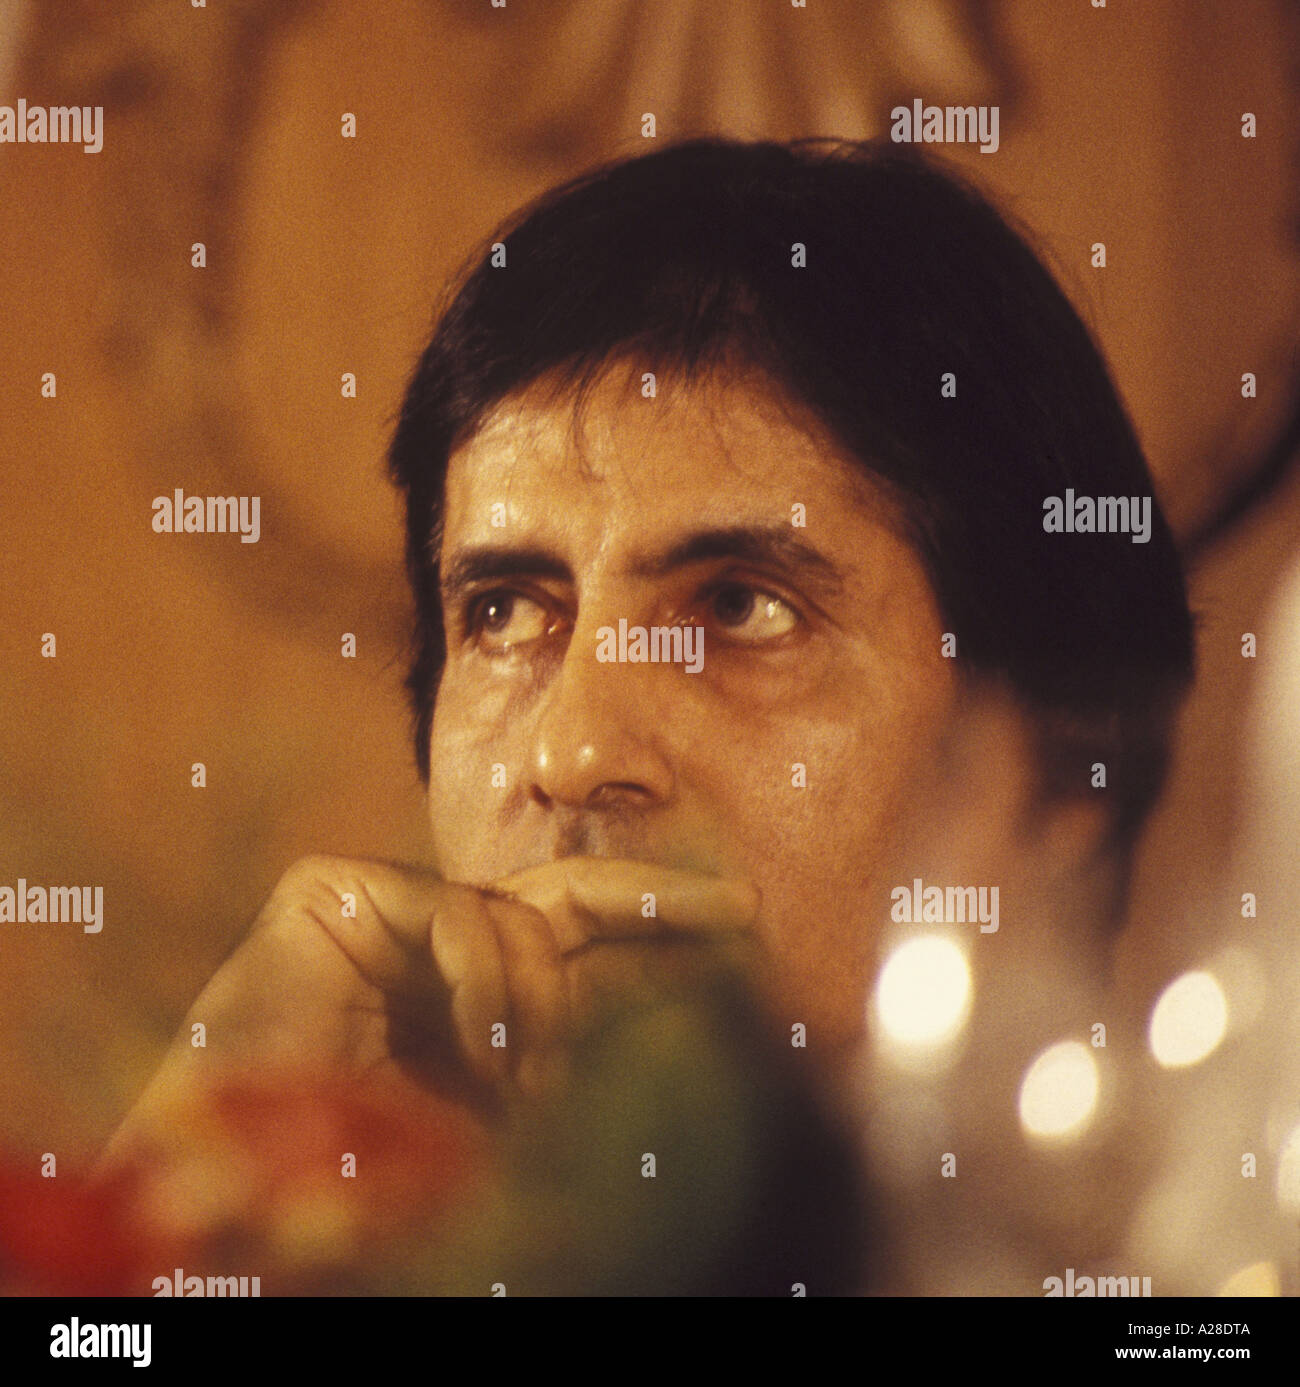 Indian Bollywood Film Star Actor Amitabh Bachchan at a press conference in India Stock Photo